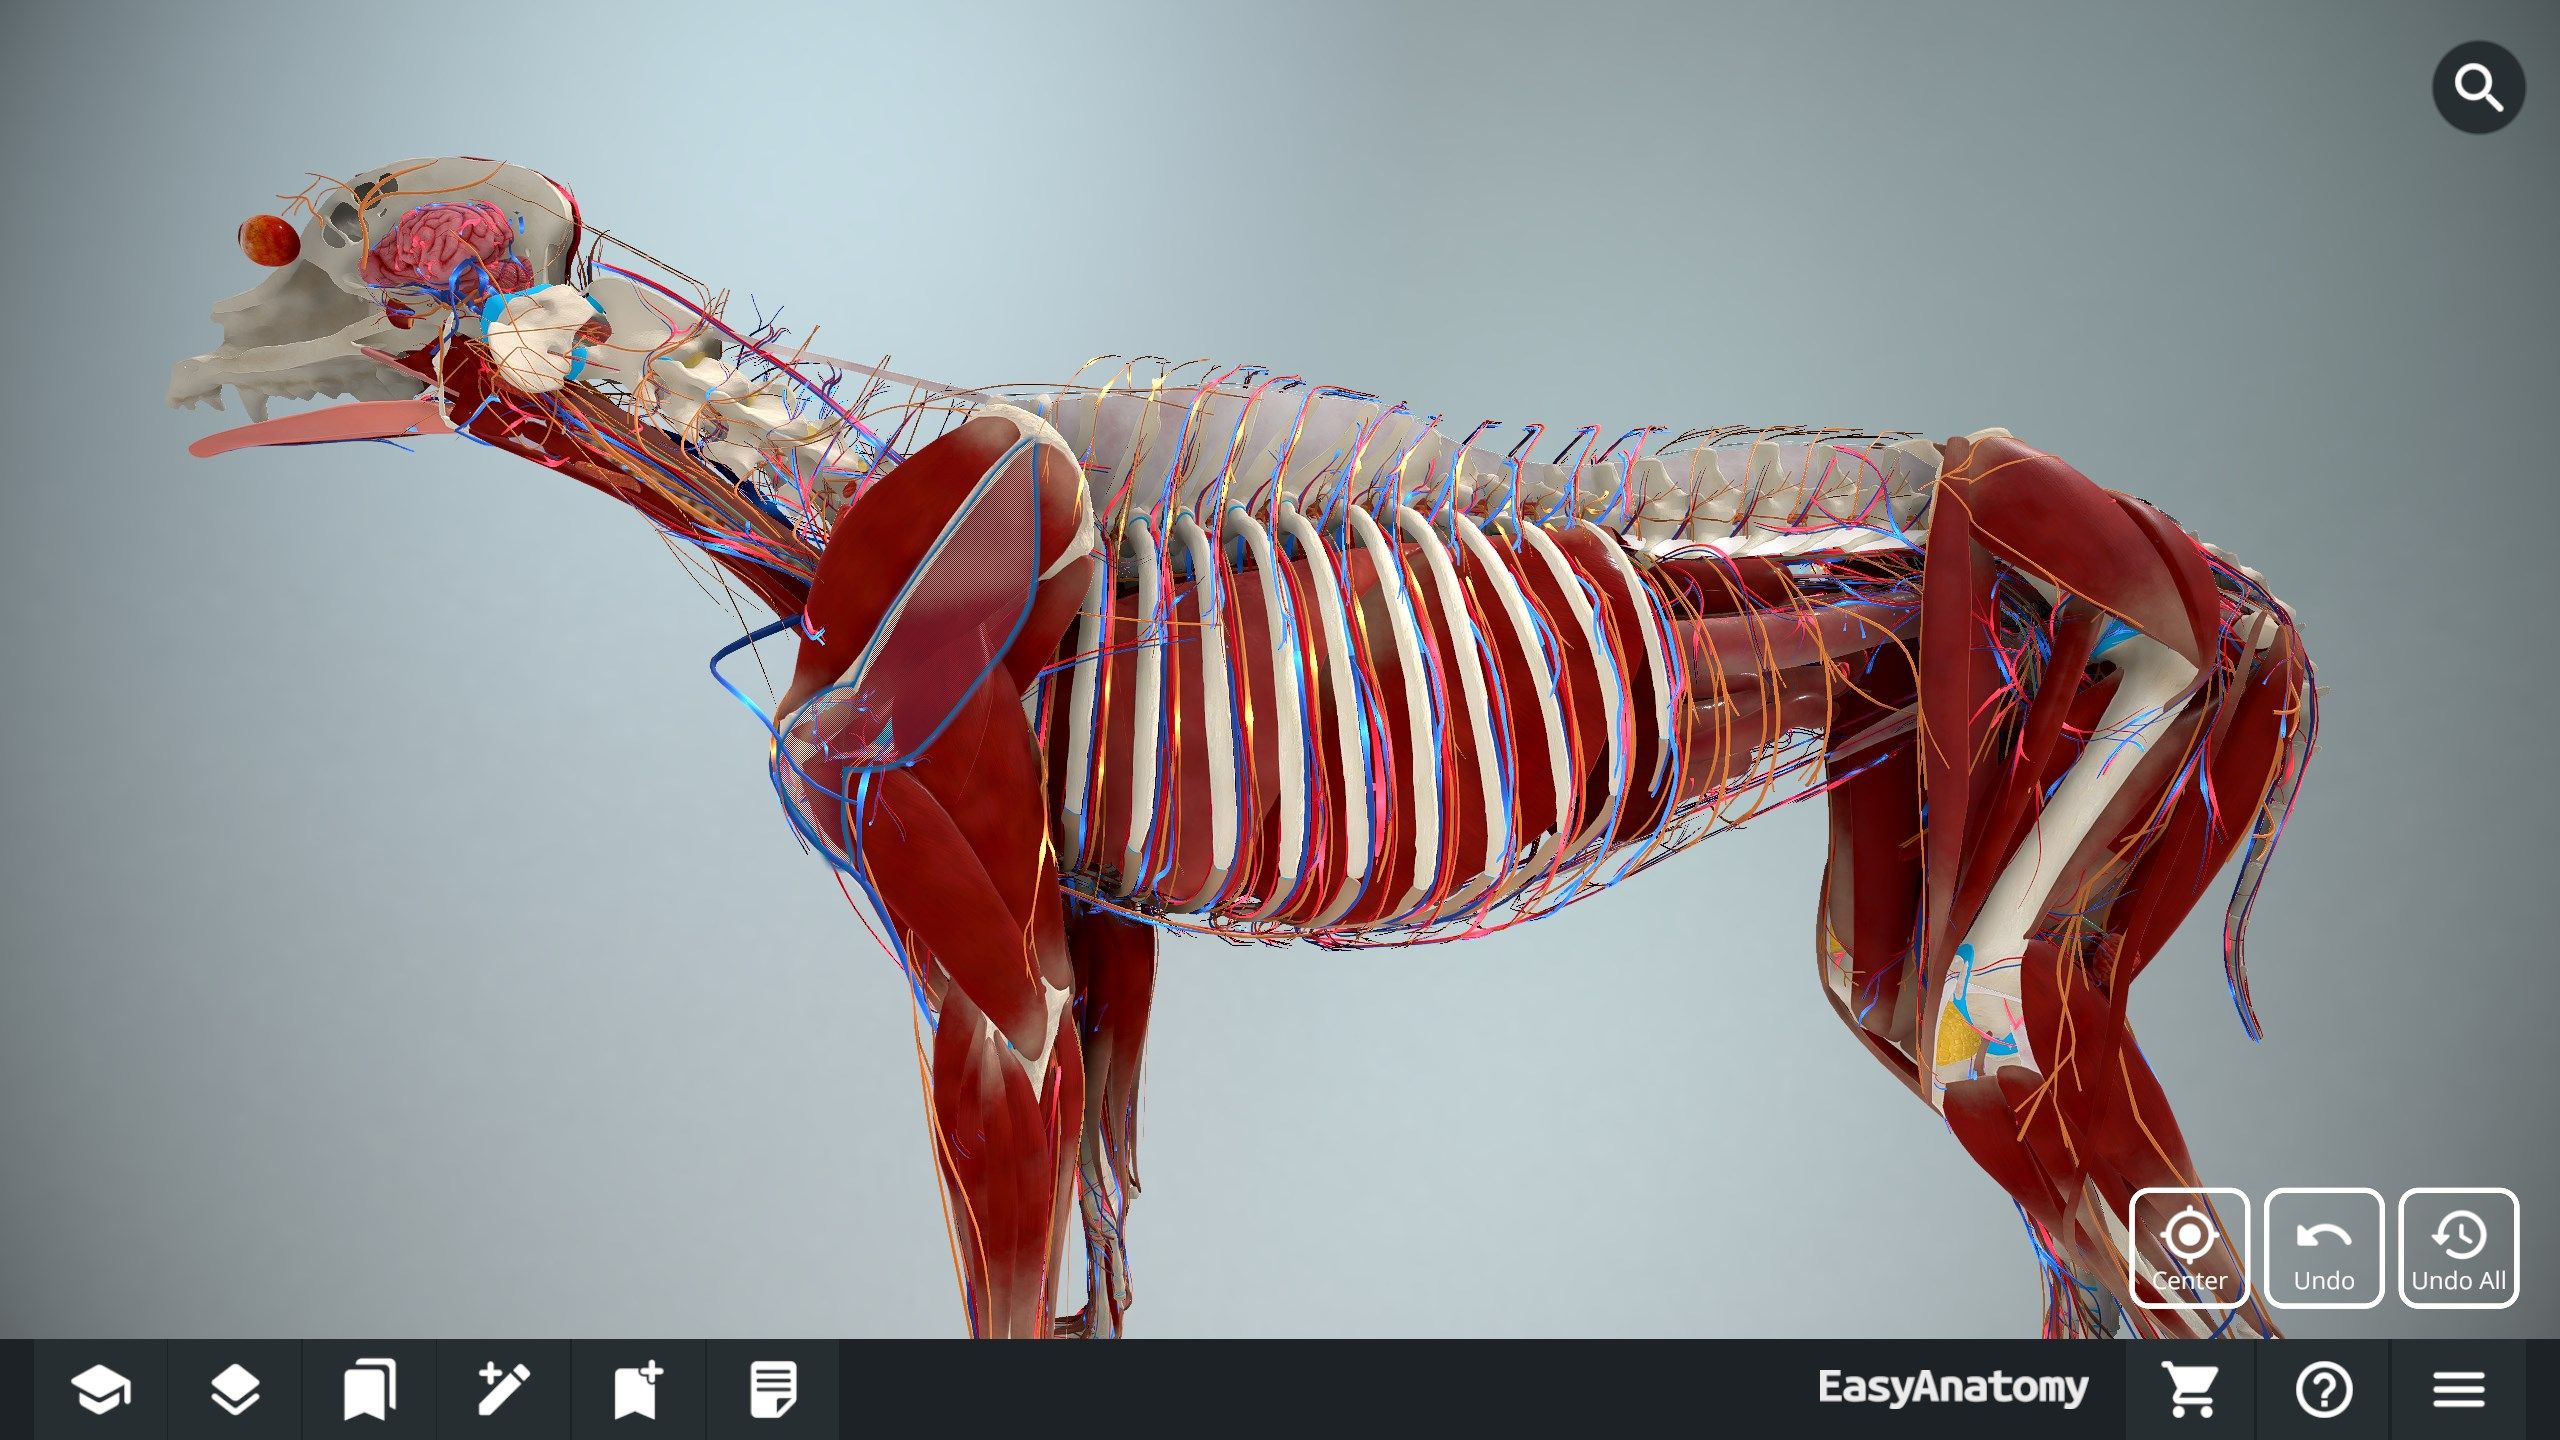 EasyAnatomy is the most comprehensive 3D canine anatomy learning and reference resource built for today's veterinary students and professors. We've taken a modern approach to explaining veterinary anatomy, focusing on clinical relevance and what you need to know during dissection labs.